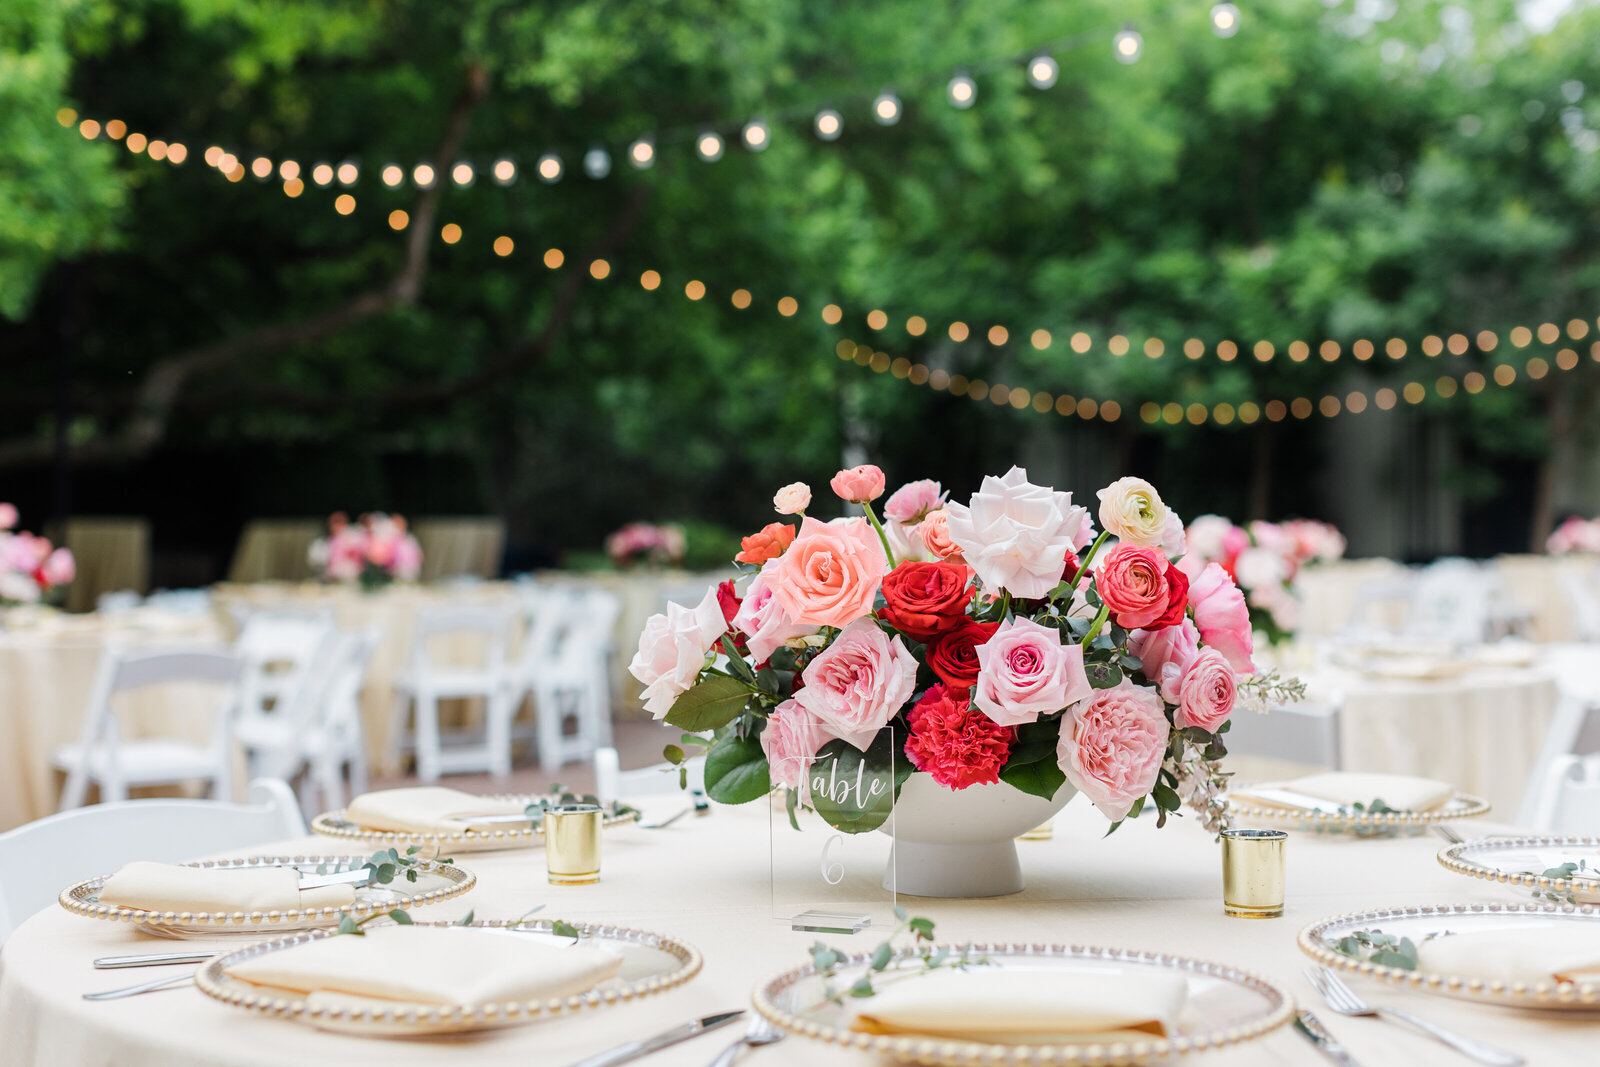 A wedding centerpiece of bold pink and blue flowers sits on a table of plates, napkins, and glassware. It's springtime, so there are vibrant green trees in the background and softly lit cafe lights making tiny little orbs in the background.